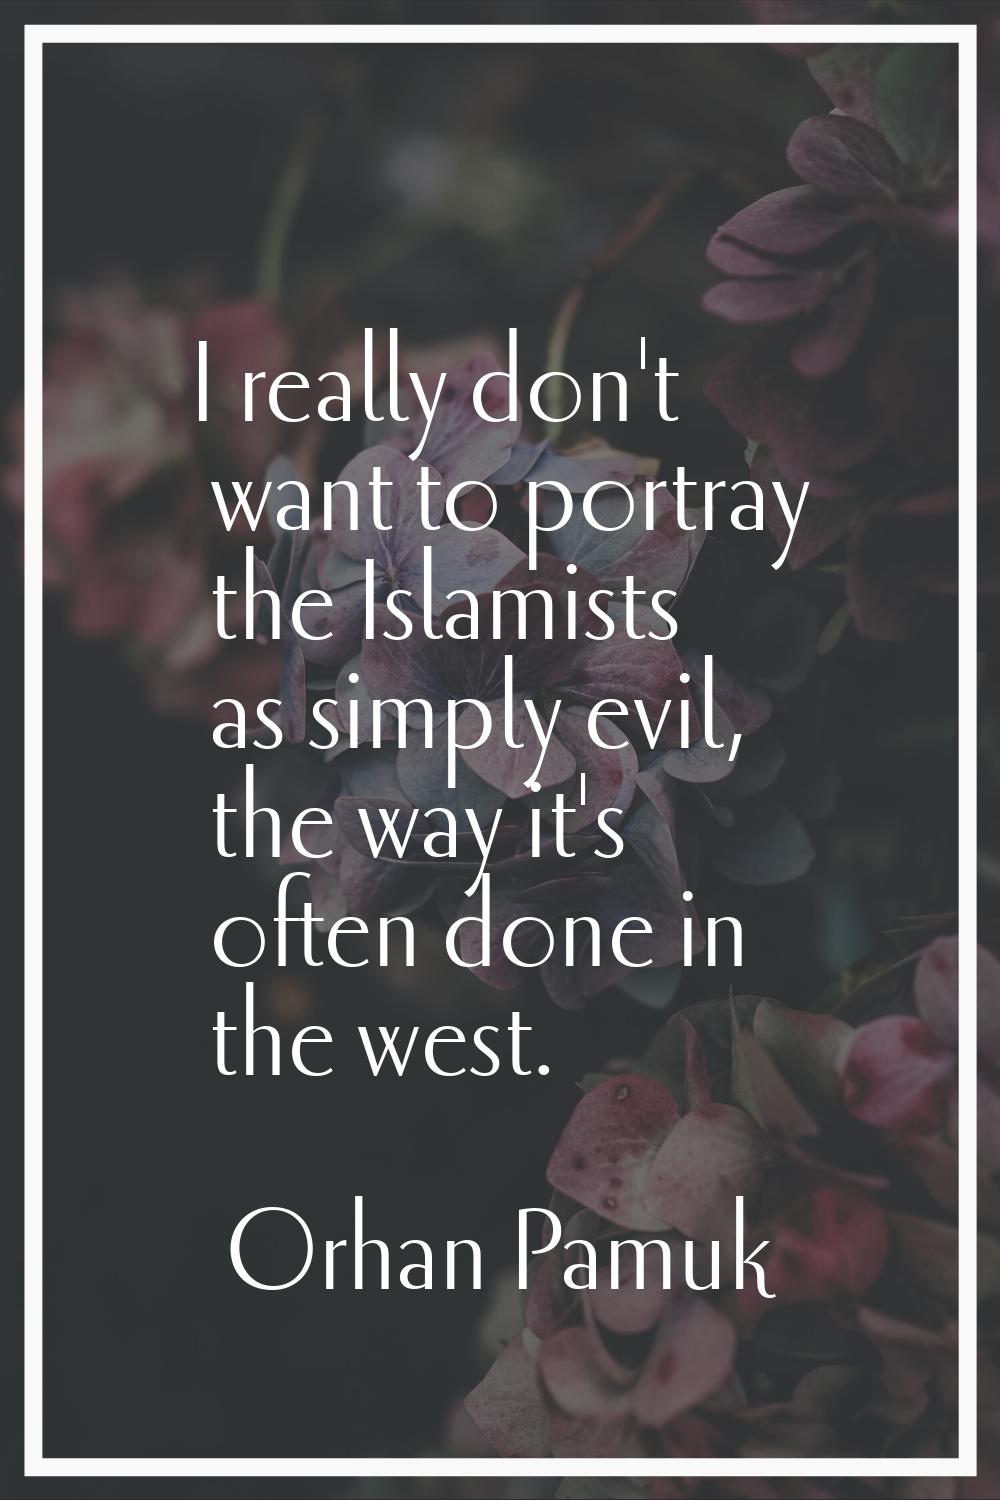 I really don't want to portray the Islamists as simply evil, the way it's often done in the west.